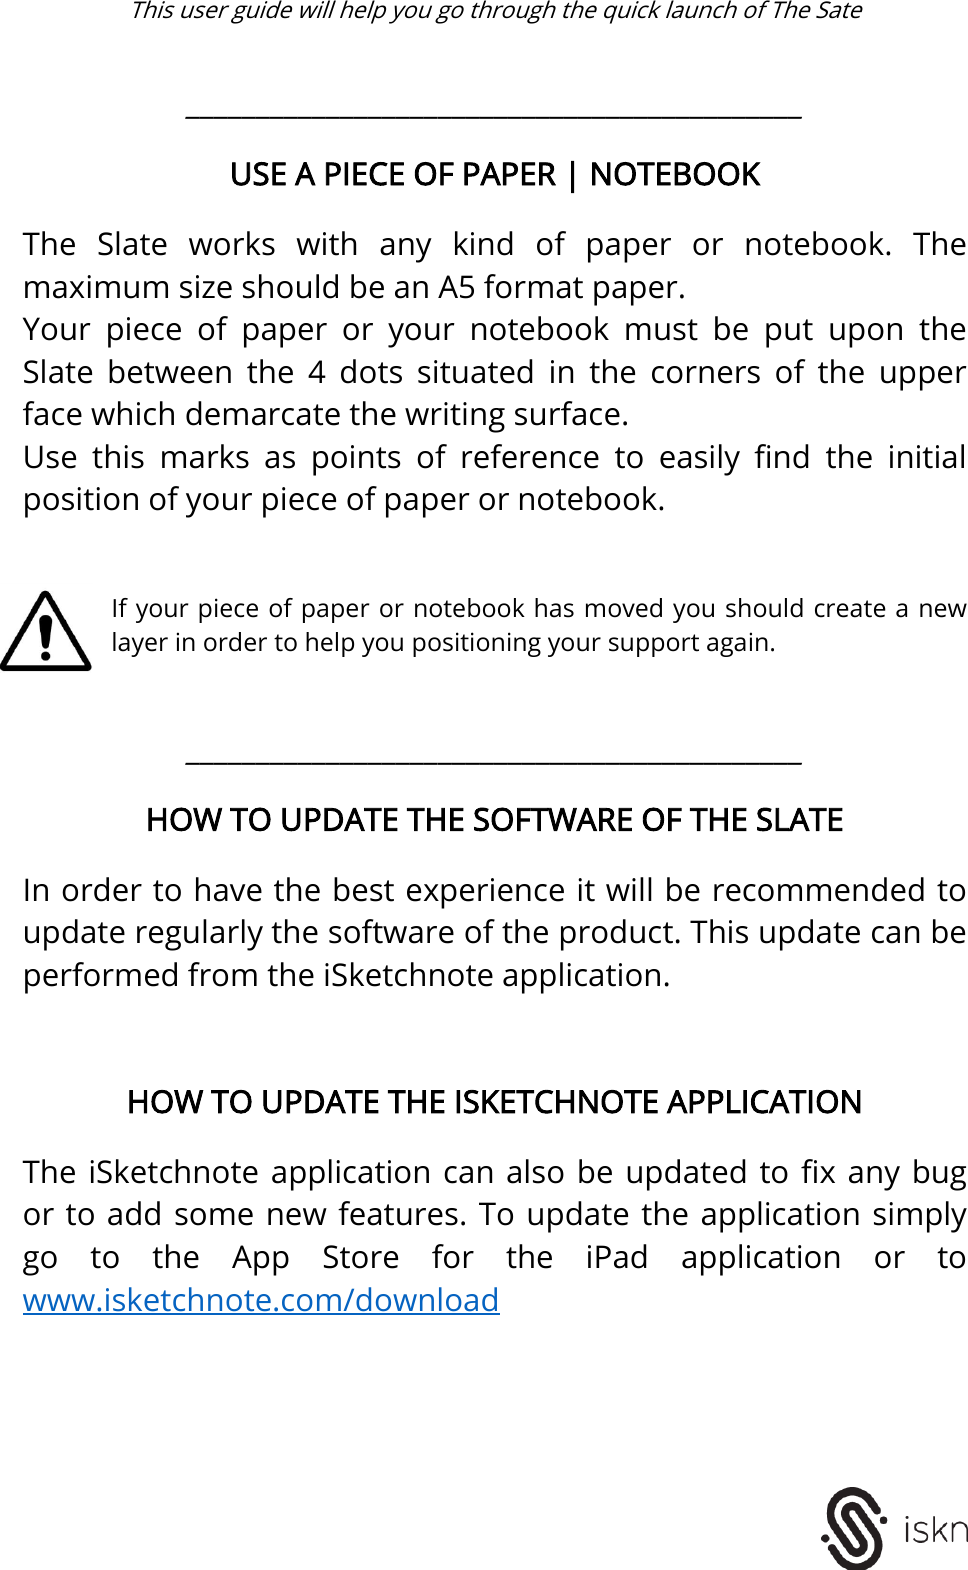  This user guide will help you go through the quick launch of The Sate    ____________________________________________  USE A PIECE OF PAPER | NOTEBOOK  The  Slate  works  with  any  kind  of  paper  or  notebook.  The maximum size should be an A5 format paper. Your  piece  of  paper  or  your  notebook  must  be  put  upon  the Slate  between  the  4  dots  situated  in  the  corners  of  the  upper face which demarcate the writing surface.  Use  this  marks  as  points  of  reference  to  easily  find  the  initial position of your piece of paper or notebook.    If your piece of paper or notebook has moved you should create a new layer in order to help you positioning your support again.   ____________________________________________  HOW TO UPDATE THE SOFTWARE OF THE SLATE  In order to have the best experience it will be recommended to update regularly the software of the product. This update can be performed from the iSketchnote application.     HOW TO UPDATE THE ISKETCHNOTE APPLICATION  The iSketchnote application can also be  updated  to fix any bug or to add some new features. To update the application simply go  to  the  App  Store  for  the  iPad  application  or  to www.isketchnote.com/download       